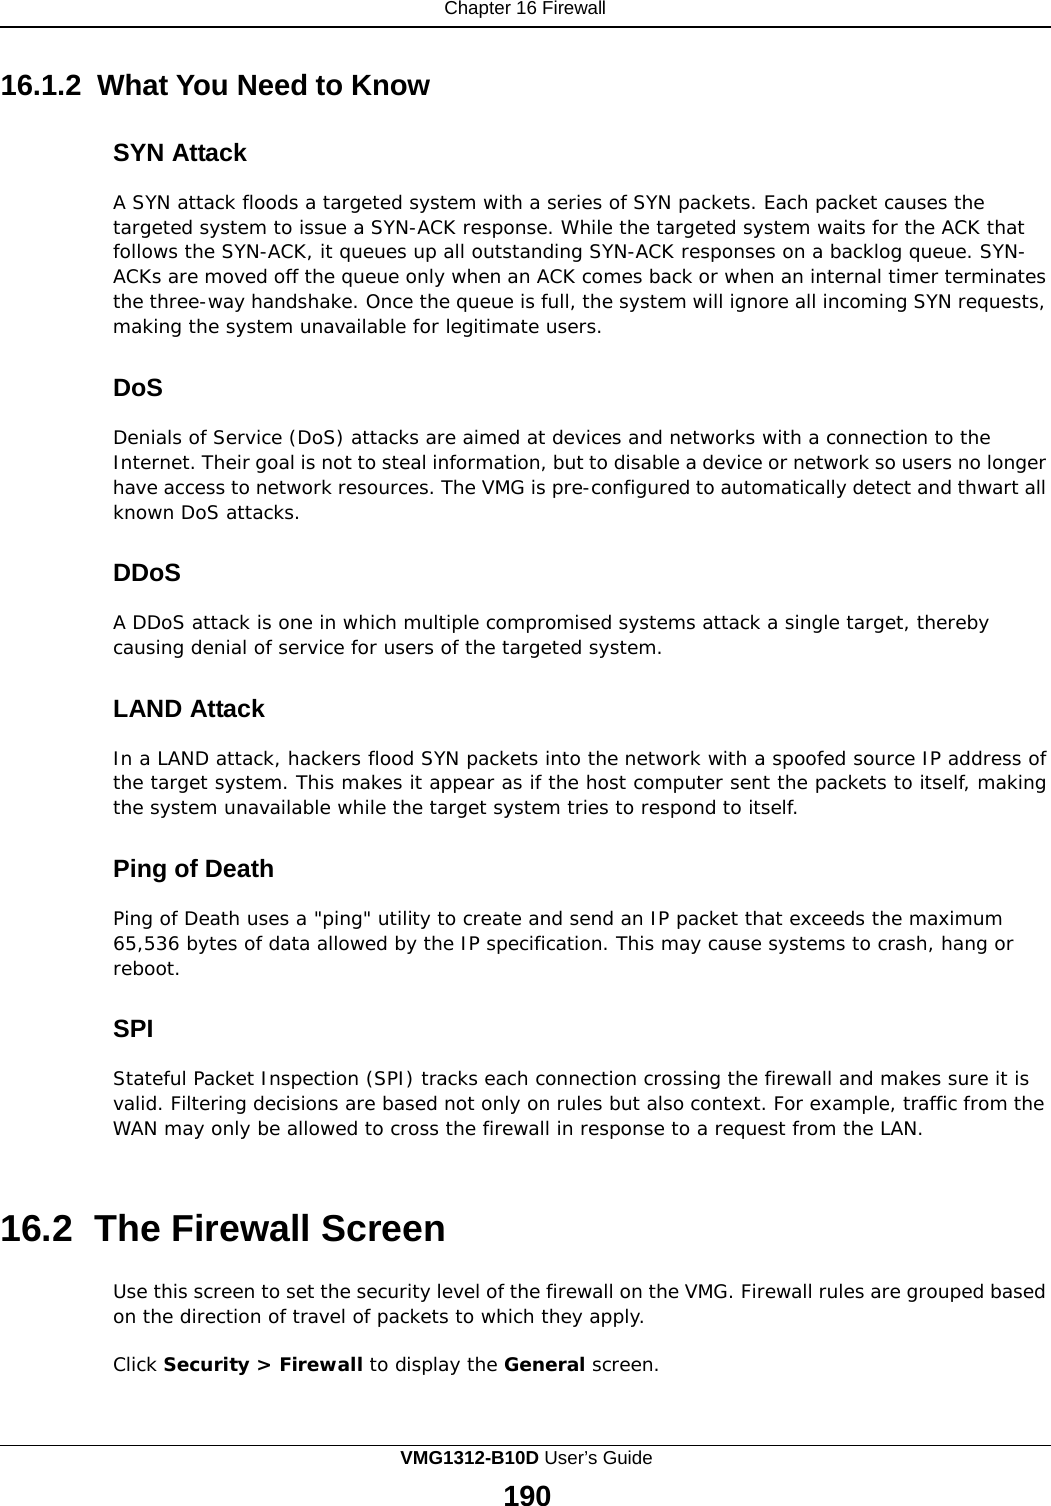 Chapter 16 Firewall    16.1.2 What You Need to Know   SYN Attack  A SYN attack floods a targeted system with a series of SYN packets. Each packet causes the targeted system to issue a SYN-ACK response. While the targeted system waits for the ACK that follows the SYN-ACK, it queues up all outstanding SYN-ACK responses on a backlog queue. SYN- ACKs are moved off the queue only when an ACK comes back or when an internal timer terminates the three-way handshake. Once the queue is full, the system will ignore all incoming SYN requests, making the system unavailable for legitimate users.   DoS  Denials of Service (DoS) attacks are aimed at devices and networks with a connection to the Internet. Their goal is not to steal information, but to disable a device or network so users no longer have access to network resources. The VMG is pre-configured to automatically detect and thwart all known DoS attacks.   DDoS  A DDoS attack is one in which multiple compromised systems attack a single target, thereby causing denial of service for users of the targeted system.   LAND Attack  In a LAND attack, hackers flood SYN packets into the network with a spoofed source IP address of the target system. This makes it appear as if the host computer sent the packets to itself, making the system unavailable while the target system tries to respond to itself.   Ping of Death  Ping of Death uses a &quot;ping&quot; utility to create and send an IP packet that exceeds the maximum 65,536 bytes of data allowed by the IP specification. This may cause systems to crash, hang or reboot.   SPI  Stateful Packet Inspection (SPI) tracks each connection crossing the firewall and makes sure it is valid. Filtering decisions are based not only on rules but also context. For example, traffic from the WAN may only be allowed to cross the firewall in response to a request from the LAN.    16.2  The Firewall Screen  Use this screen to set the security level of the firewall on the VMG. Firewall rules are grouped based on the direction of travel of packets to which they apply.  Click Security &gt; Firewall to display the General screen. VMG1312-B10D User’s Guide 190  